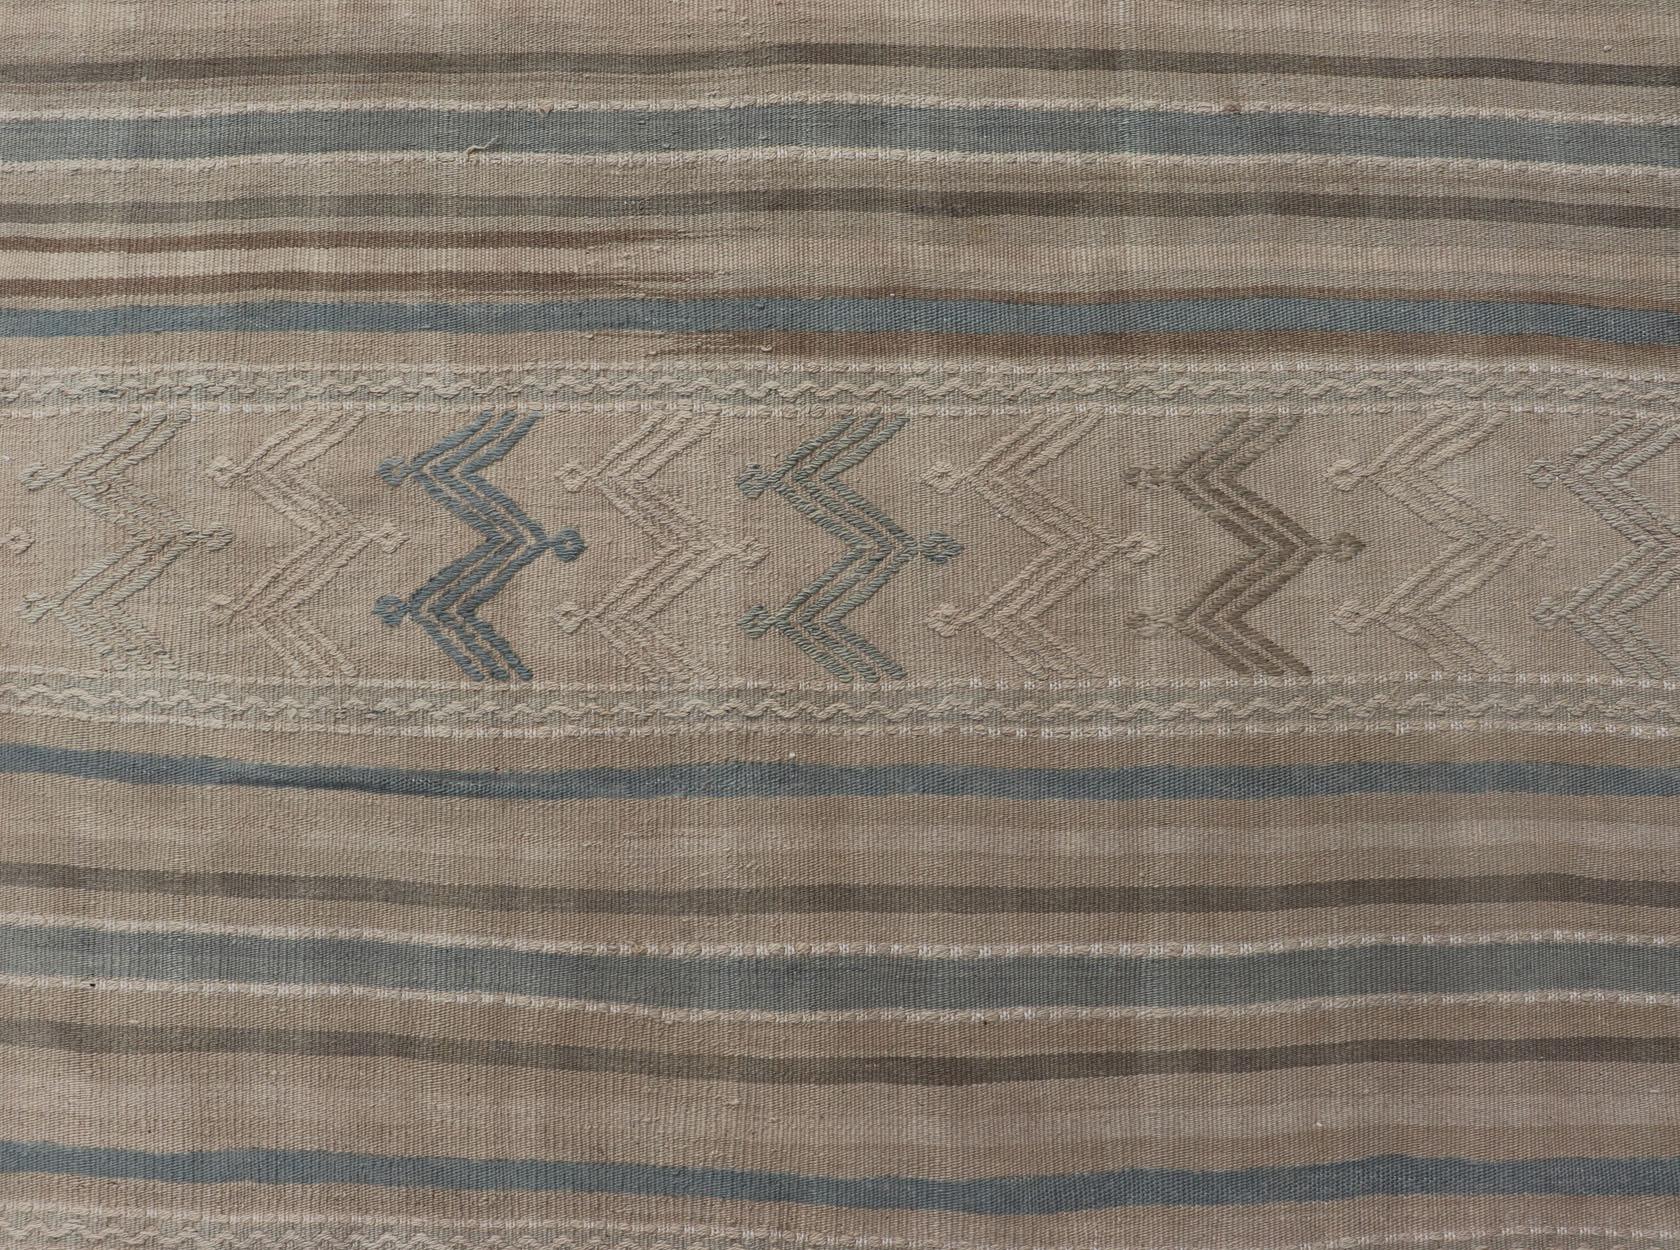 Turkish Vintage Kilim With Embroidered Motifs in Light Tan, Blue L. Brown For Sale 3